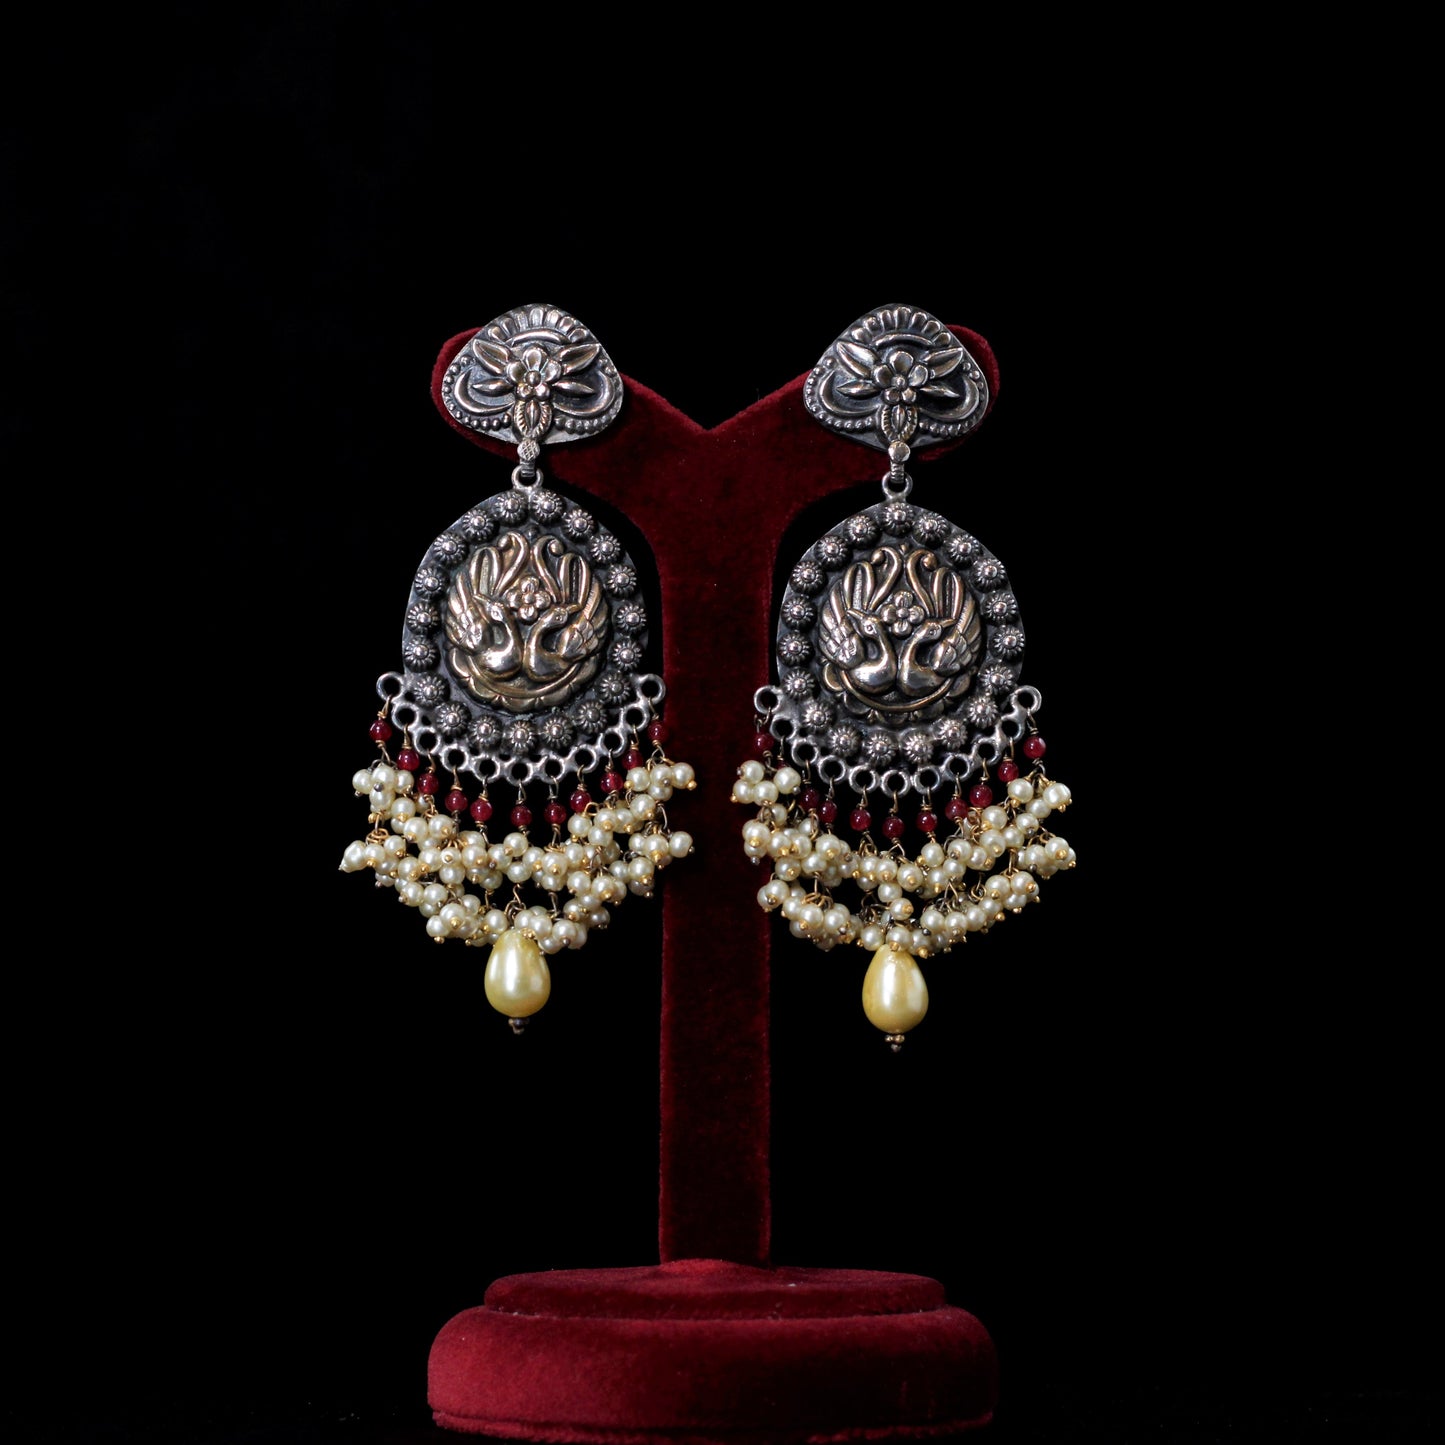 TWO-toned EARRINGS :- 92.5 STERLING SILVER WITH RED ONYX & FRESH WATER PEARLS.